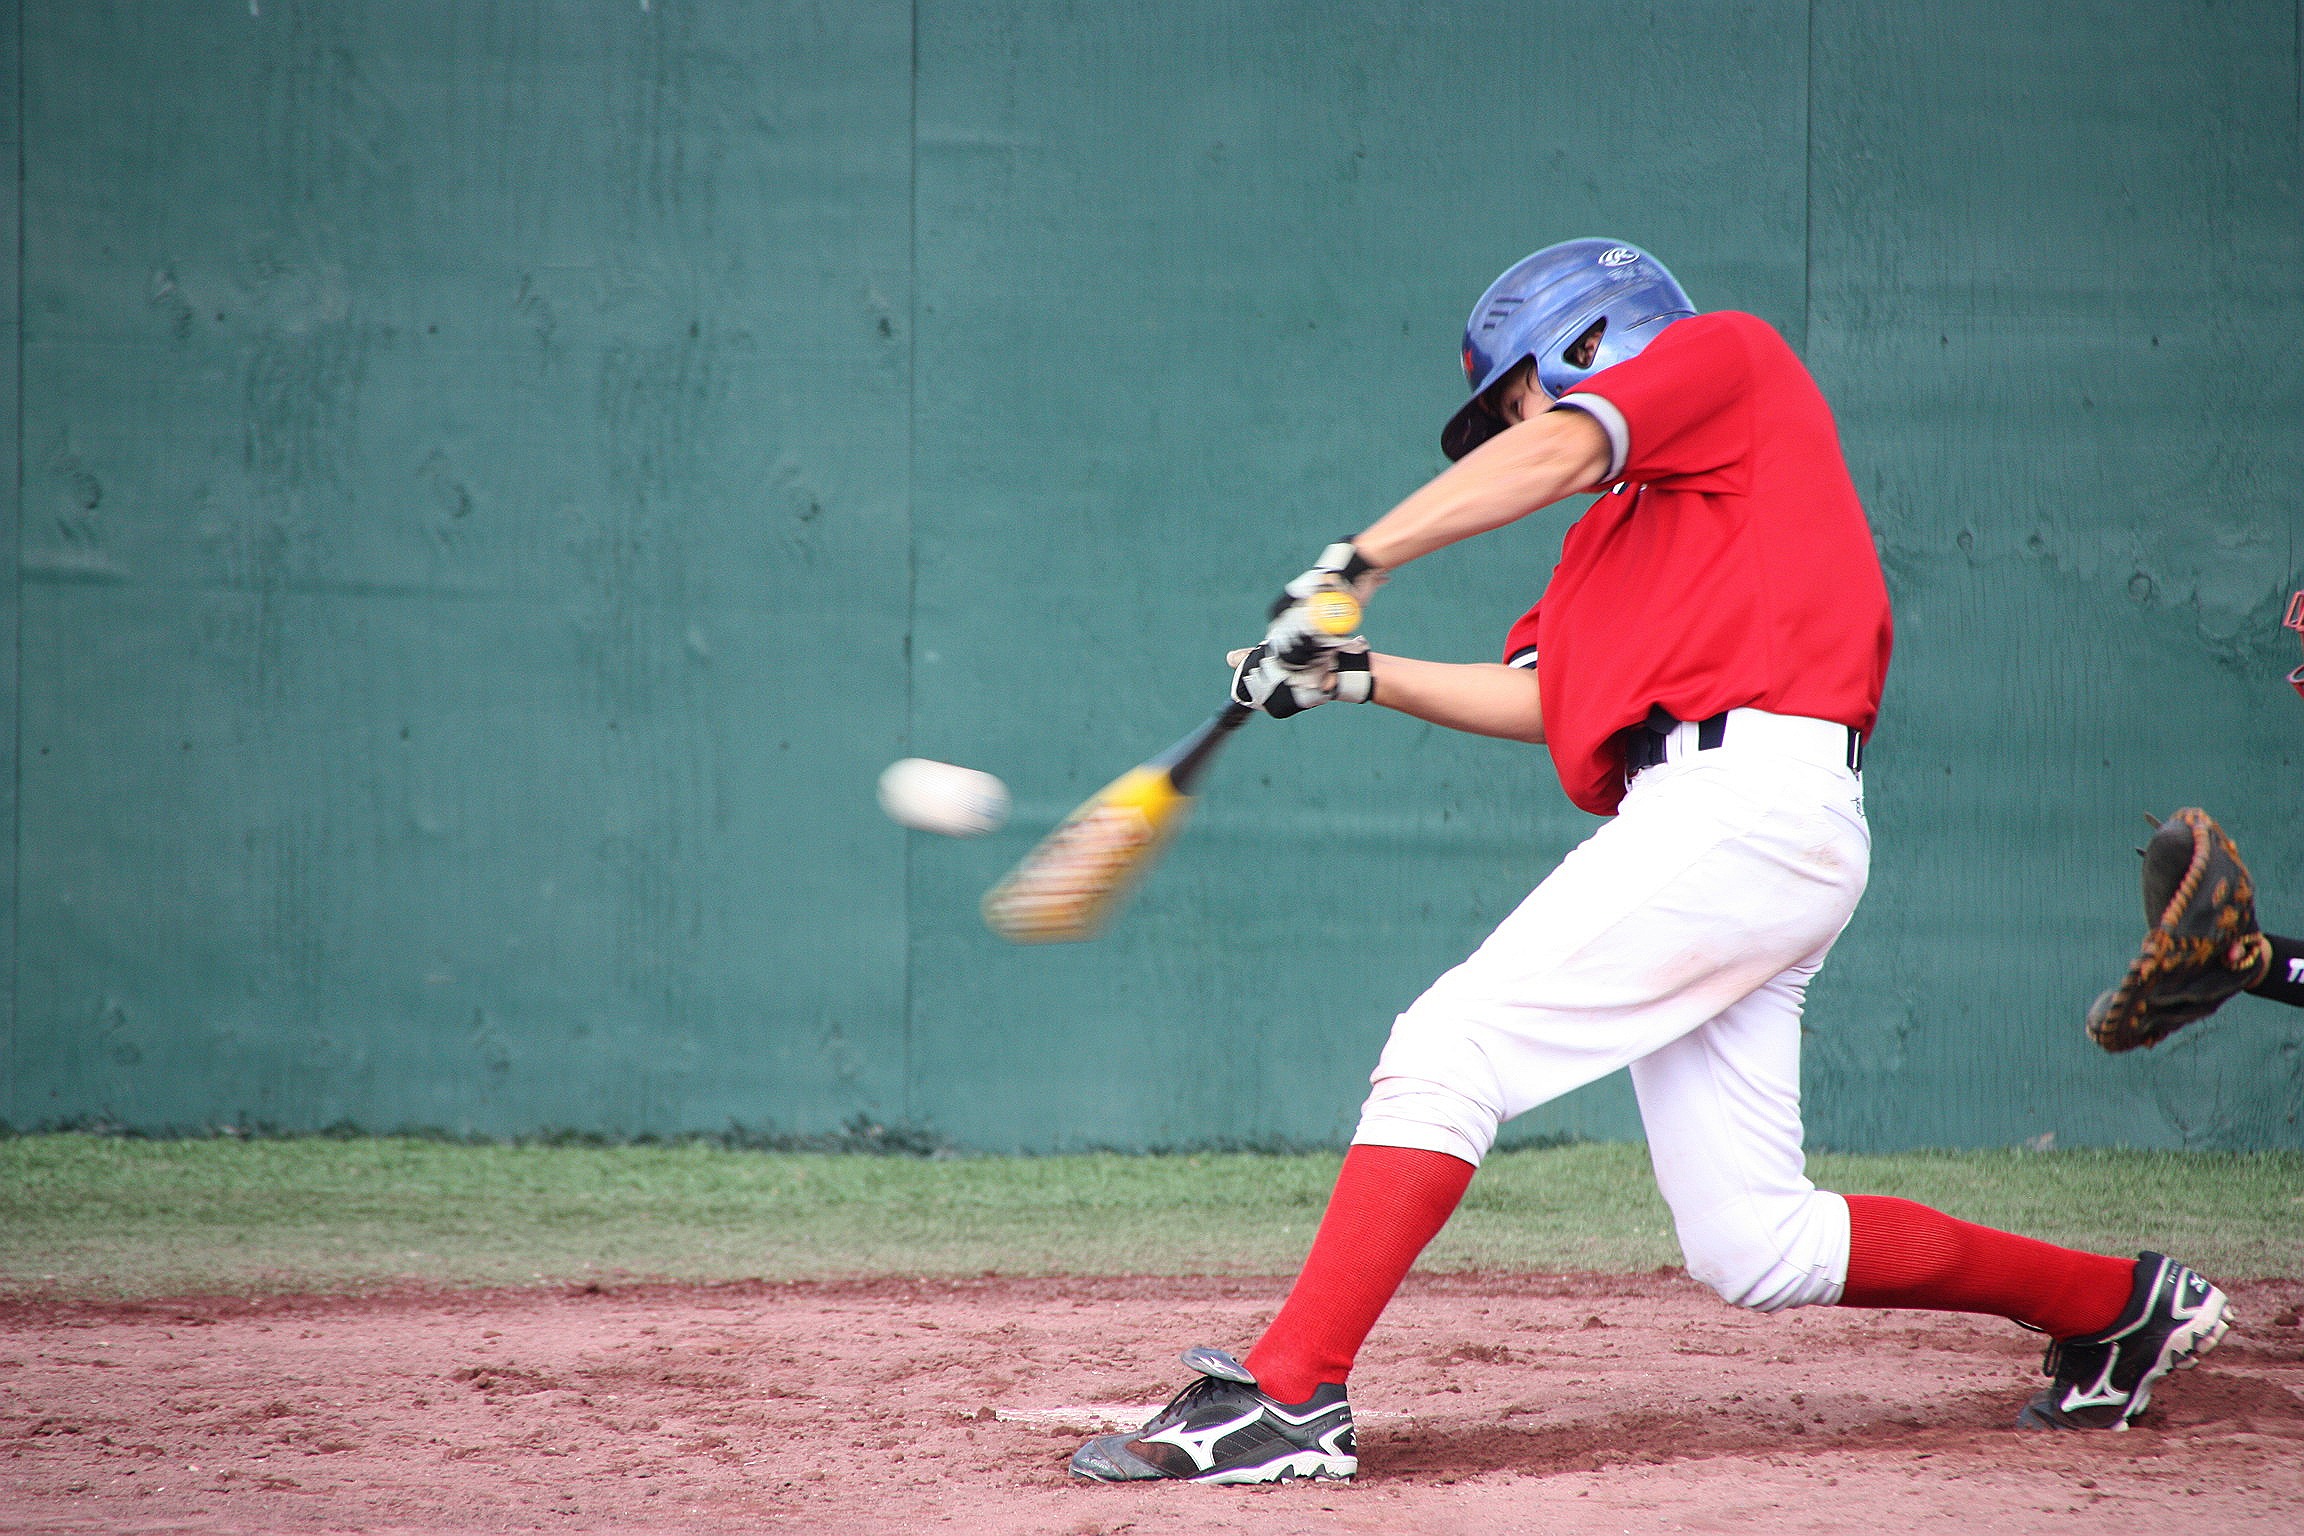 Vince DeSantis connects on a grand slam home run during the Pali Waves' victory over Ohio at the Cooperstown Dreams Tournament.